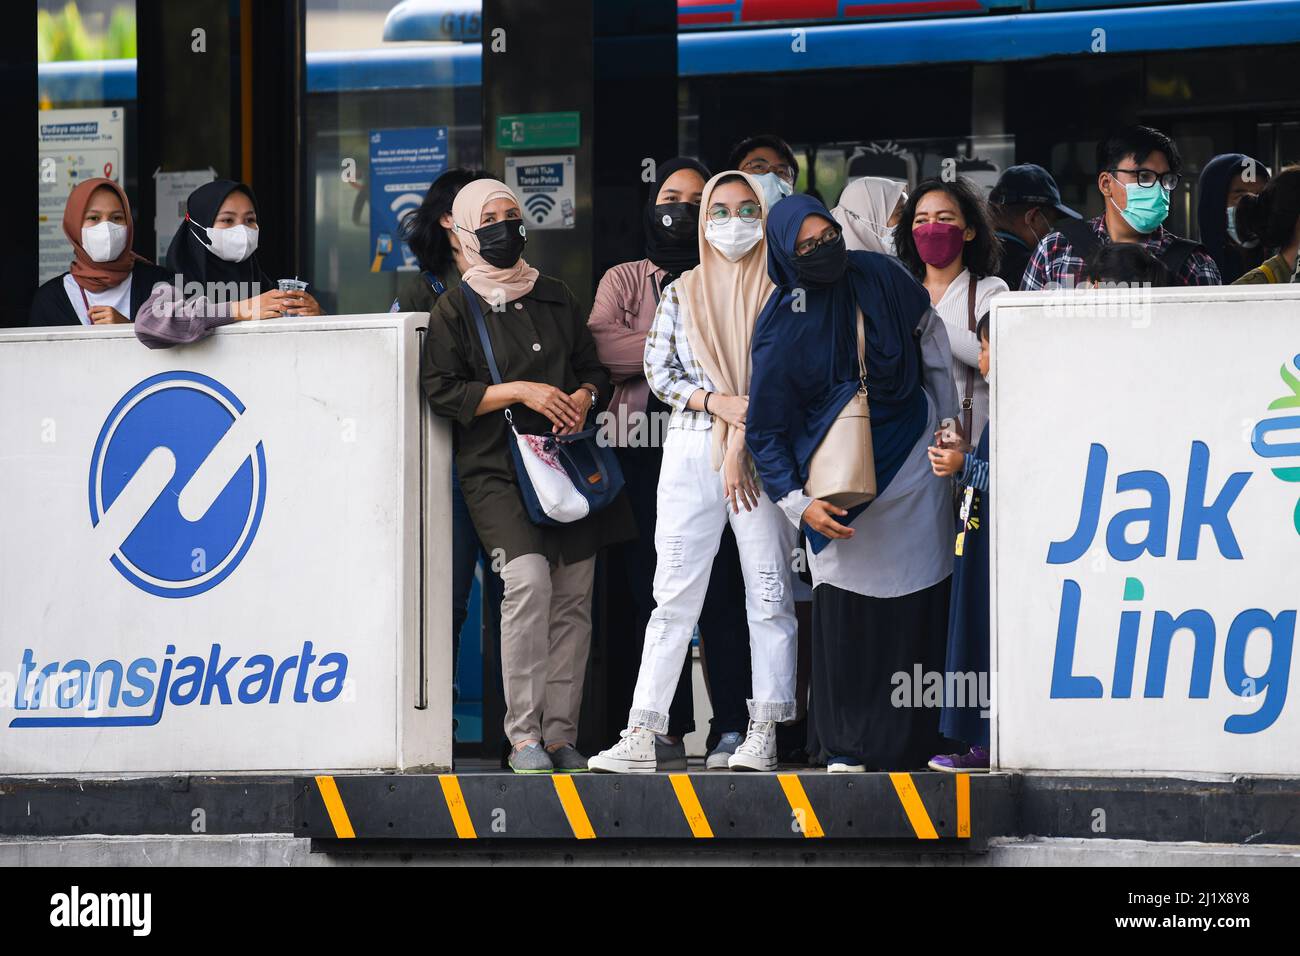 Jakarta, Indonesia. 27th Mar, 2022. People wearing masks wait for buses at a bus stop in Jakarta, Indonesia, March 27, 2022. Indonesia has registered more than 6 million cases of COVID-19 since the first case was confirmed in the country in March 2020. On Monday, the Health Ministry reported that the coronavirus cases across the archipelago rose by 2,798 within the past 24 hours to 6,001,751 with the death toll adding by 104 to 154,774. Credit: Xu Qin/Xinhua/Alamy Live News Stock Photo